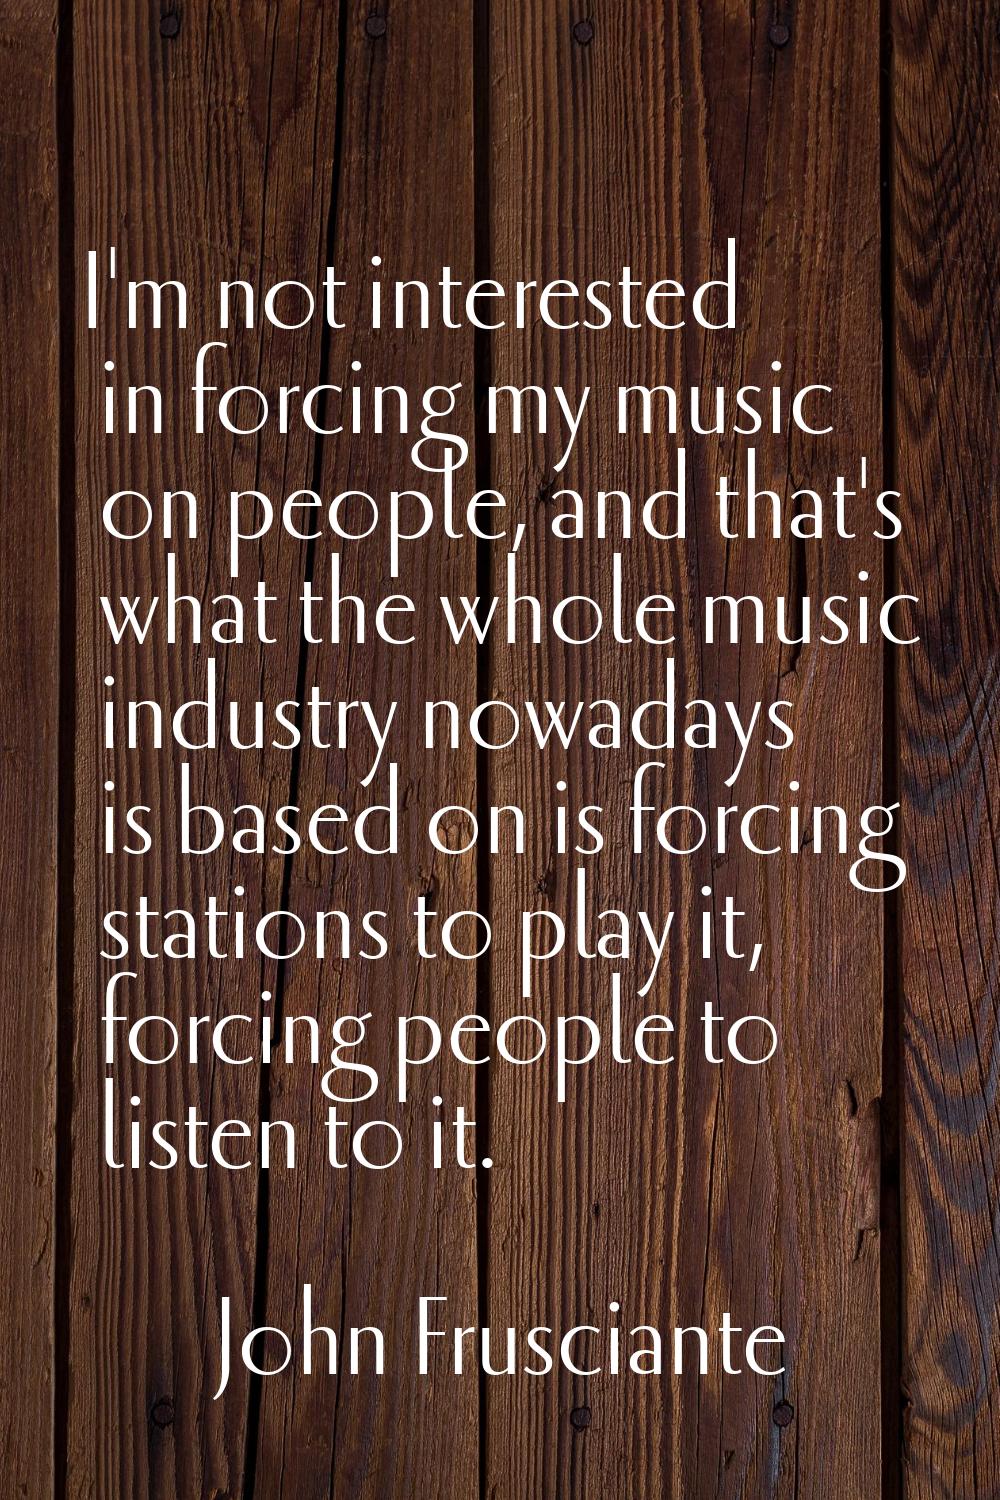 I'm not interested in forcing my music on people, and that's what the whole music industry nowadays